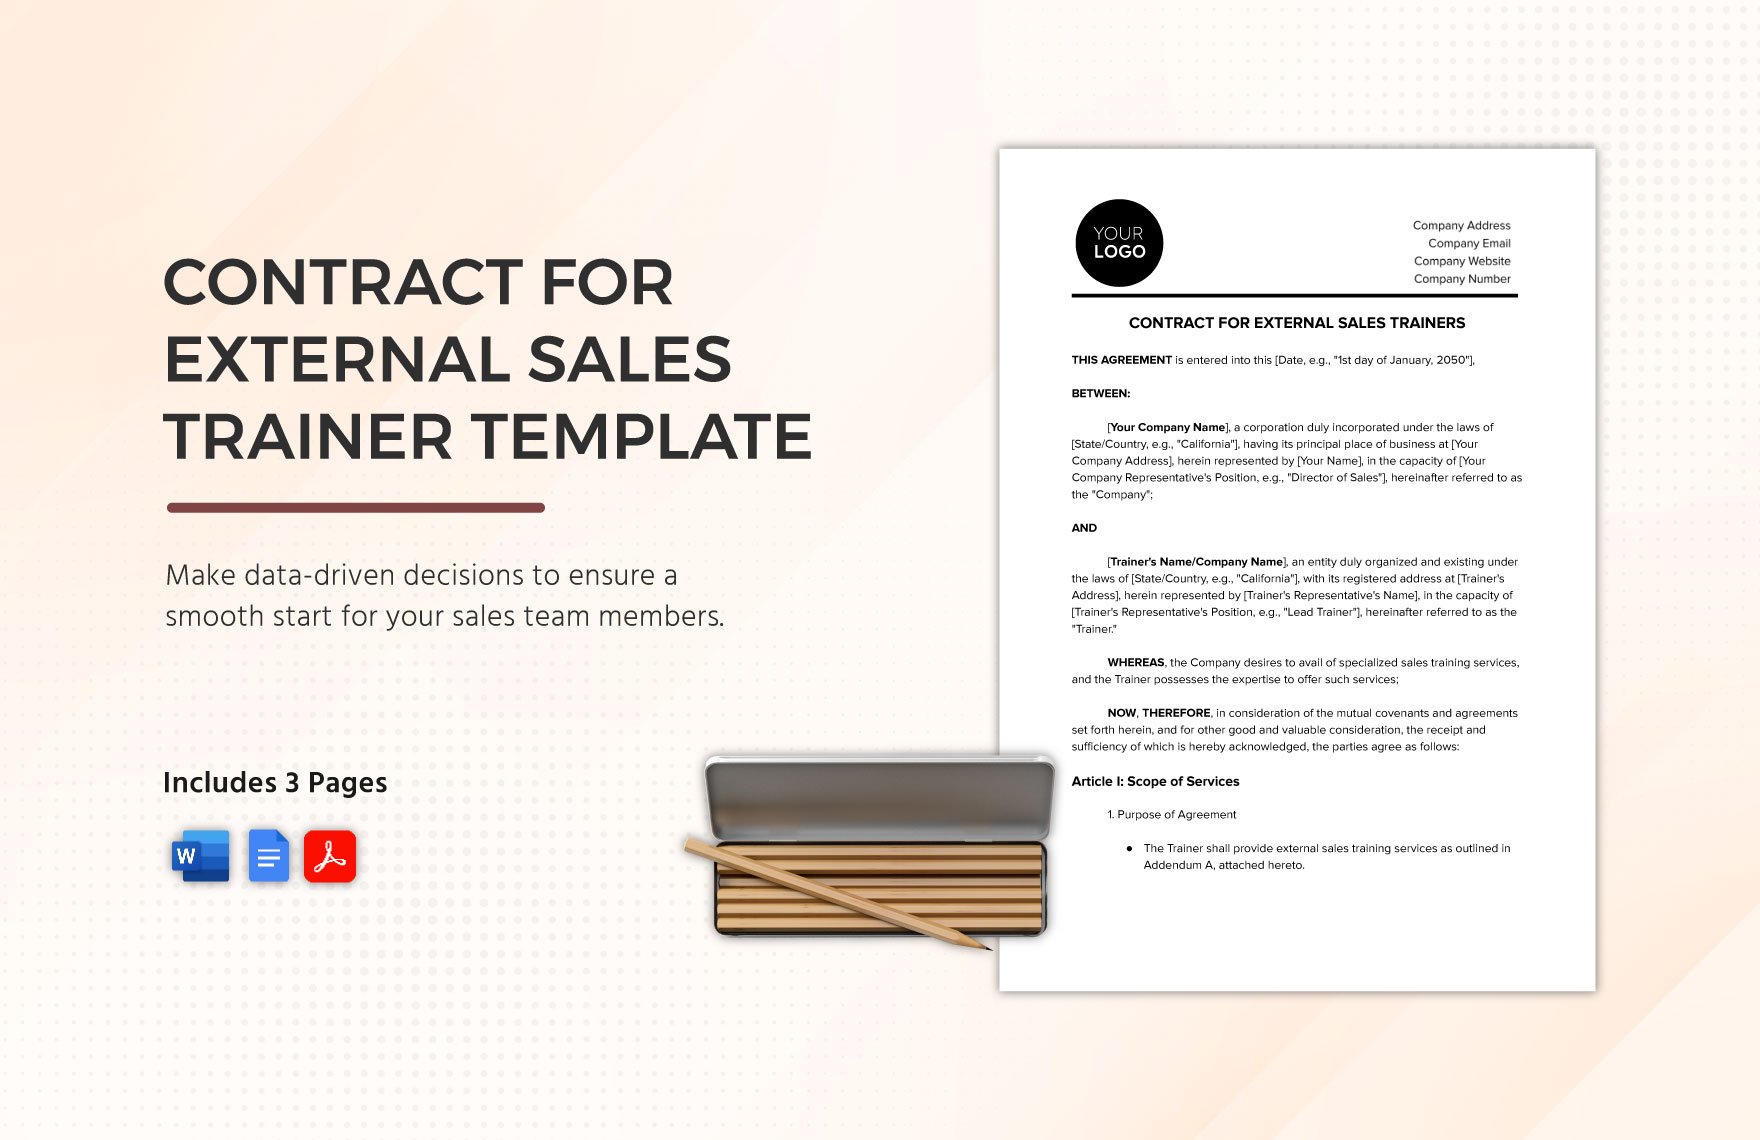 Contract for External Sales Trainers Template in Word, Google Docs, PDF